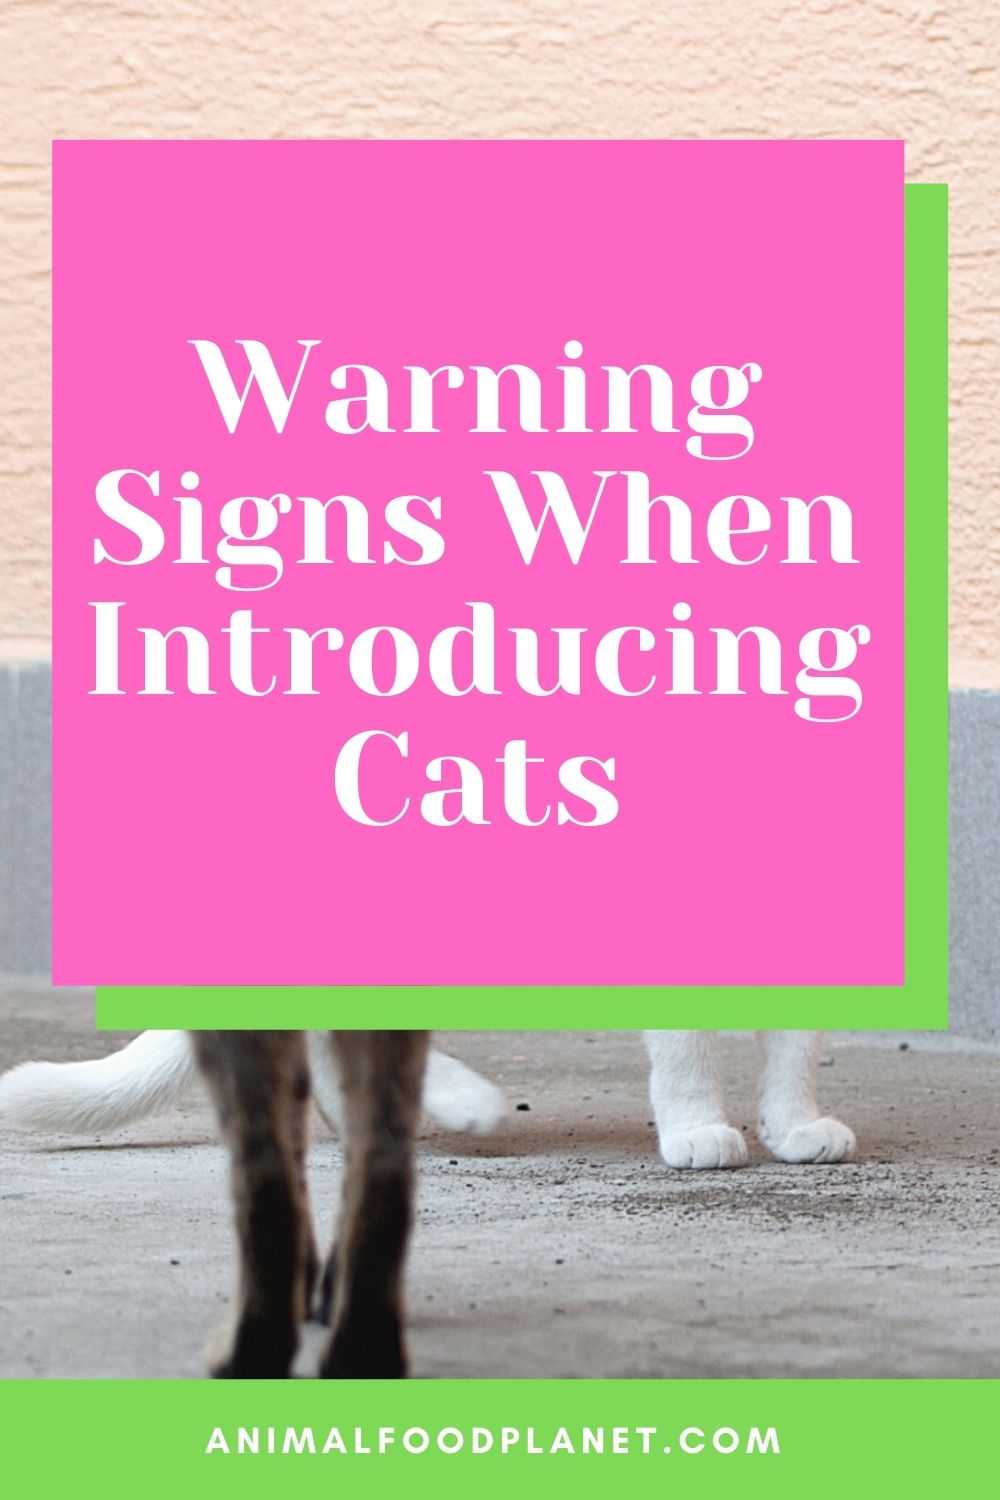 Warning Signs When Introducing Cats